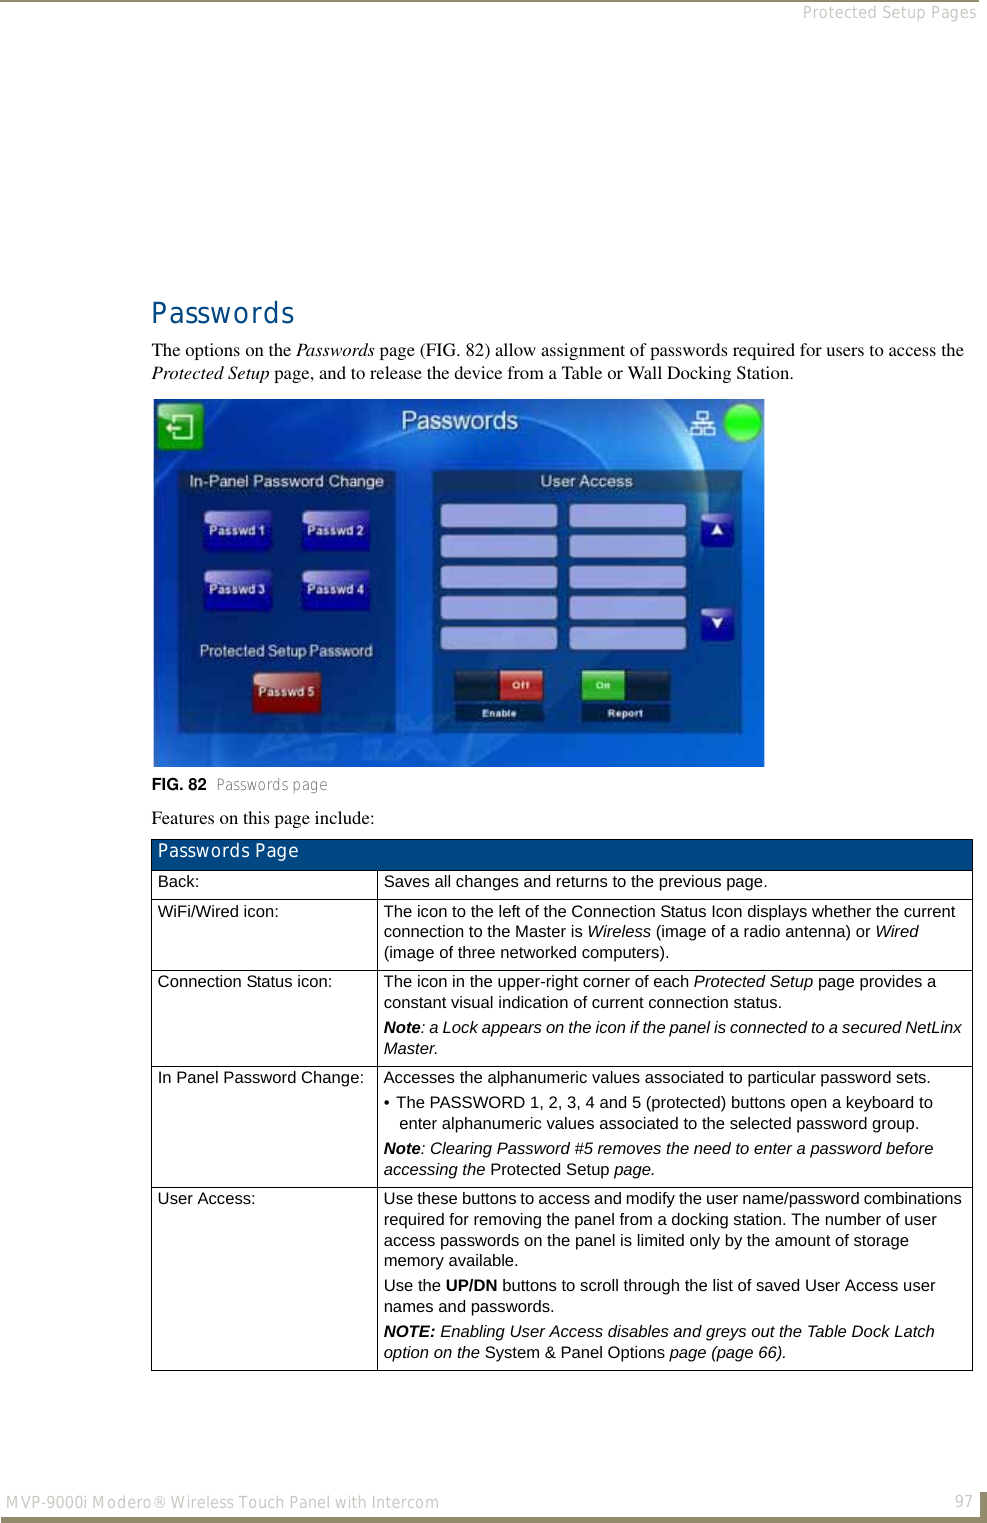 Protected Setup Pages97MVP-9000i Modero® Wireless Touch Panel with IntercomPasswordsThe options on the Passwords page (FIG. 82) allow assignment of passwords required for users to access the Protected Setup page, and to release the device from a Table or Wall Docking Station.Features on this page include:FIG. 82  Passwords pagePasswords Page Back: Saves all changes and returns to the previous page.WiFi/Wired icon: The icon to the left of the Connection Status Icon displays whether the current connection to the Master is Wireless (image of a radio antenna) or Wired (image of three networked computers).Connection Status icon: The icon in the upper-right corner of each Protected Setup page provides a constant visual indication of current connection status.Note: a Lock appears on the icon if the panel is connected to a secured NetLinx Master.In Panel Password Change: Accesses the alphanumeric values associated to particular password sets.• The PASSWORD 1, 2, 3, 4 and 5 (protected) buttons open a keyboard to enter alphanumeric values associated to the selected password group.Note: Clearing Password #5 removes the need to enter a password before accessing the Protected Setup page.User Access: Use these buttons to access and modify the user name/password combinations required for removing the panel from a docking station. The number of user access passwords on the panel is limited only by the amount of storage memory available.Use the UP/DN buttons to scroll through the list of saved User Access user names and passwords.NOTE: Enabling User Access disables and greys out the Table Dock Latch option on the System &amp; Panel Options page (page 66).